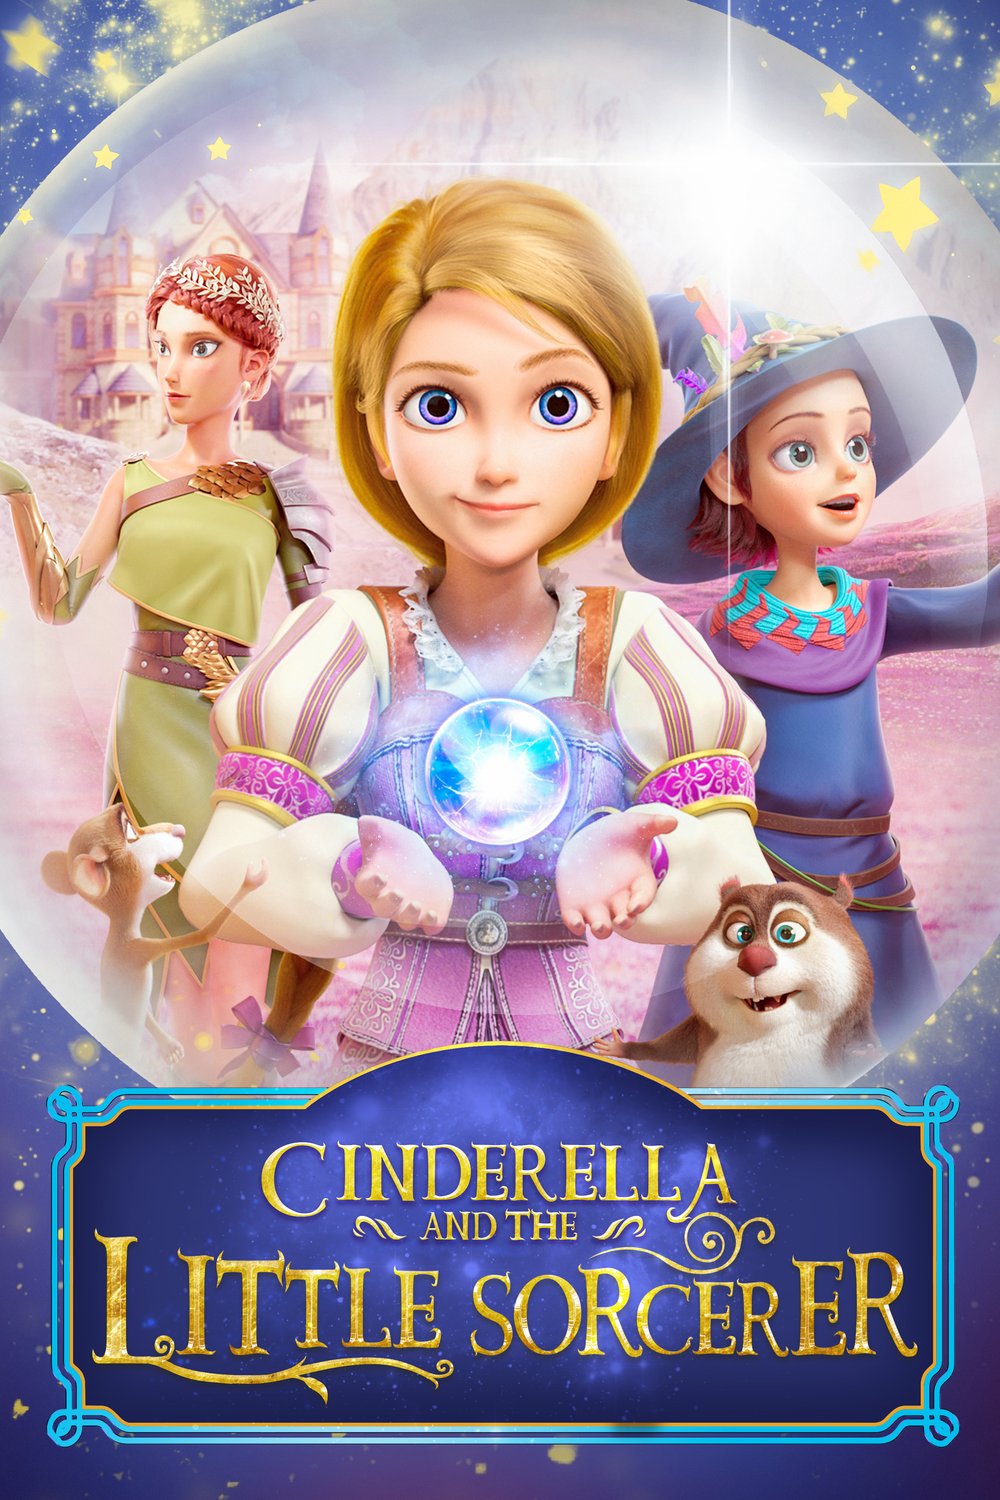 Poster of the movie Ella and the Little Sorcerer